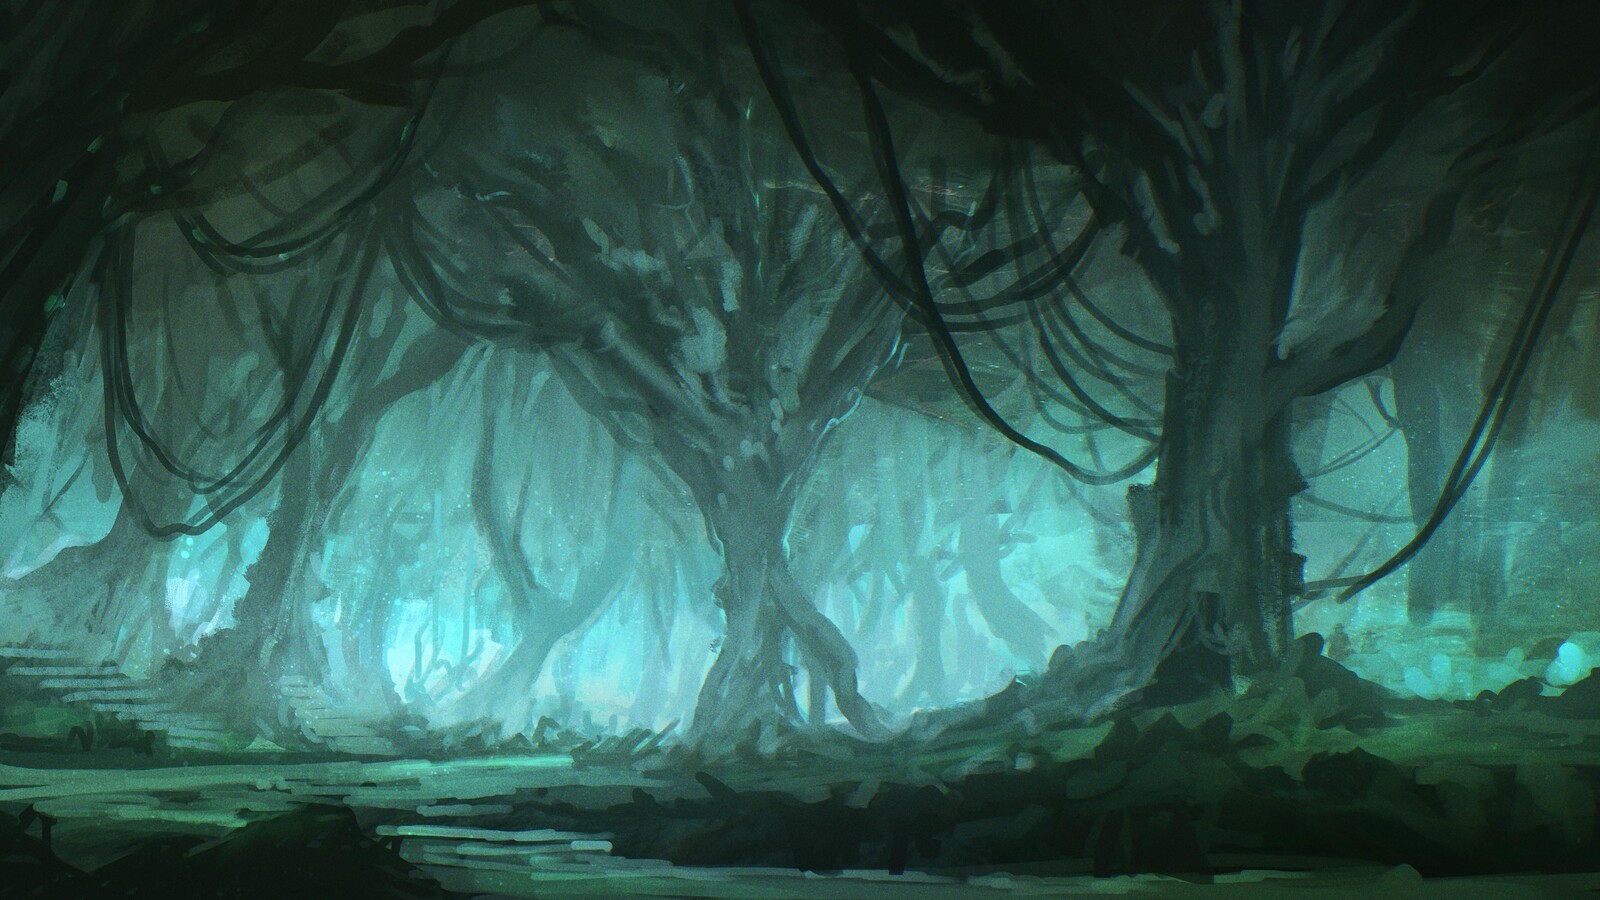 Magic forest (Sketch)